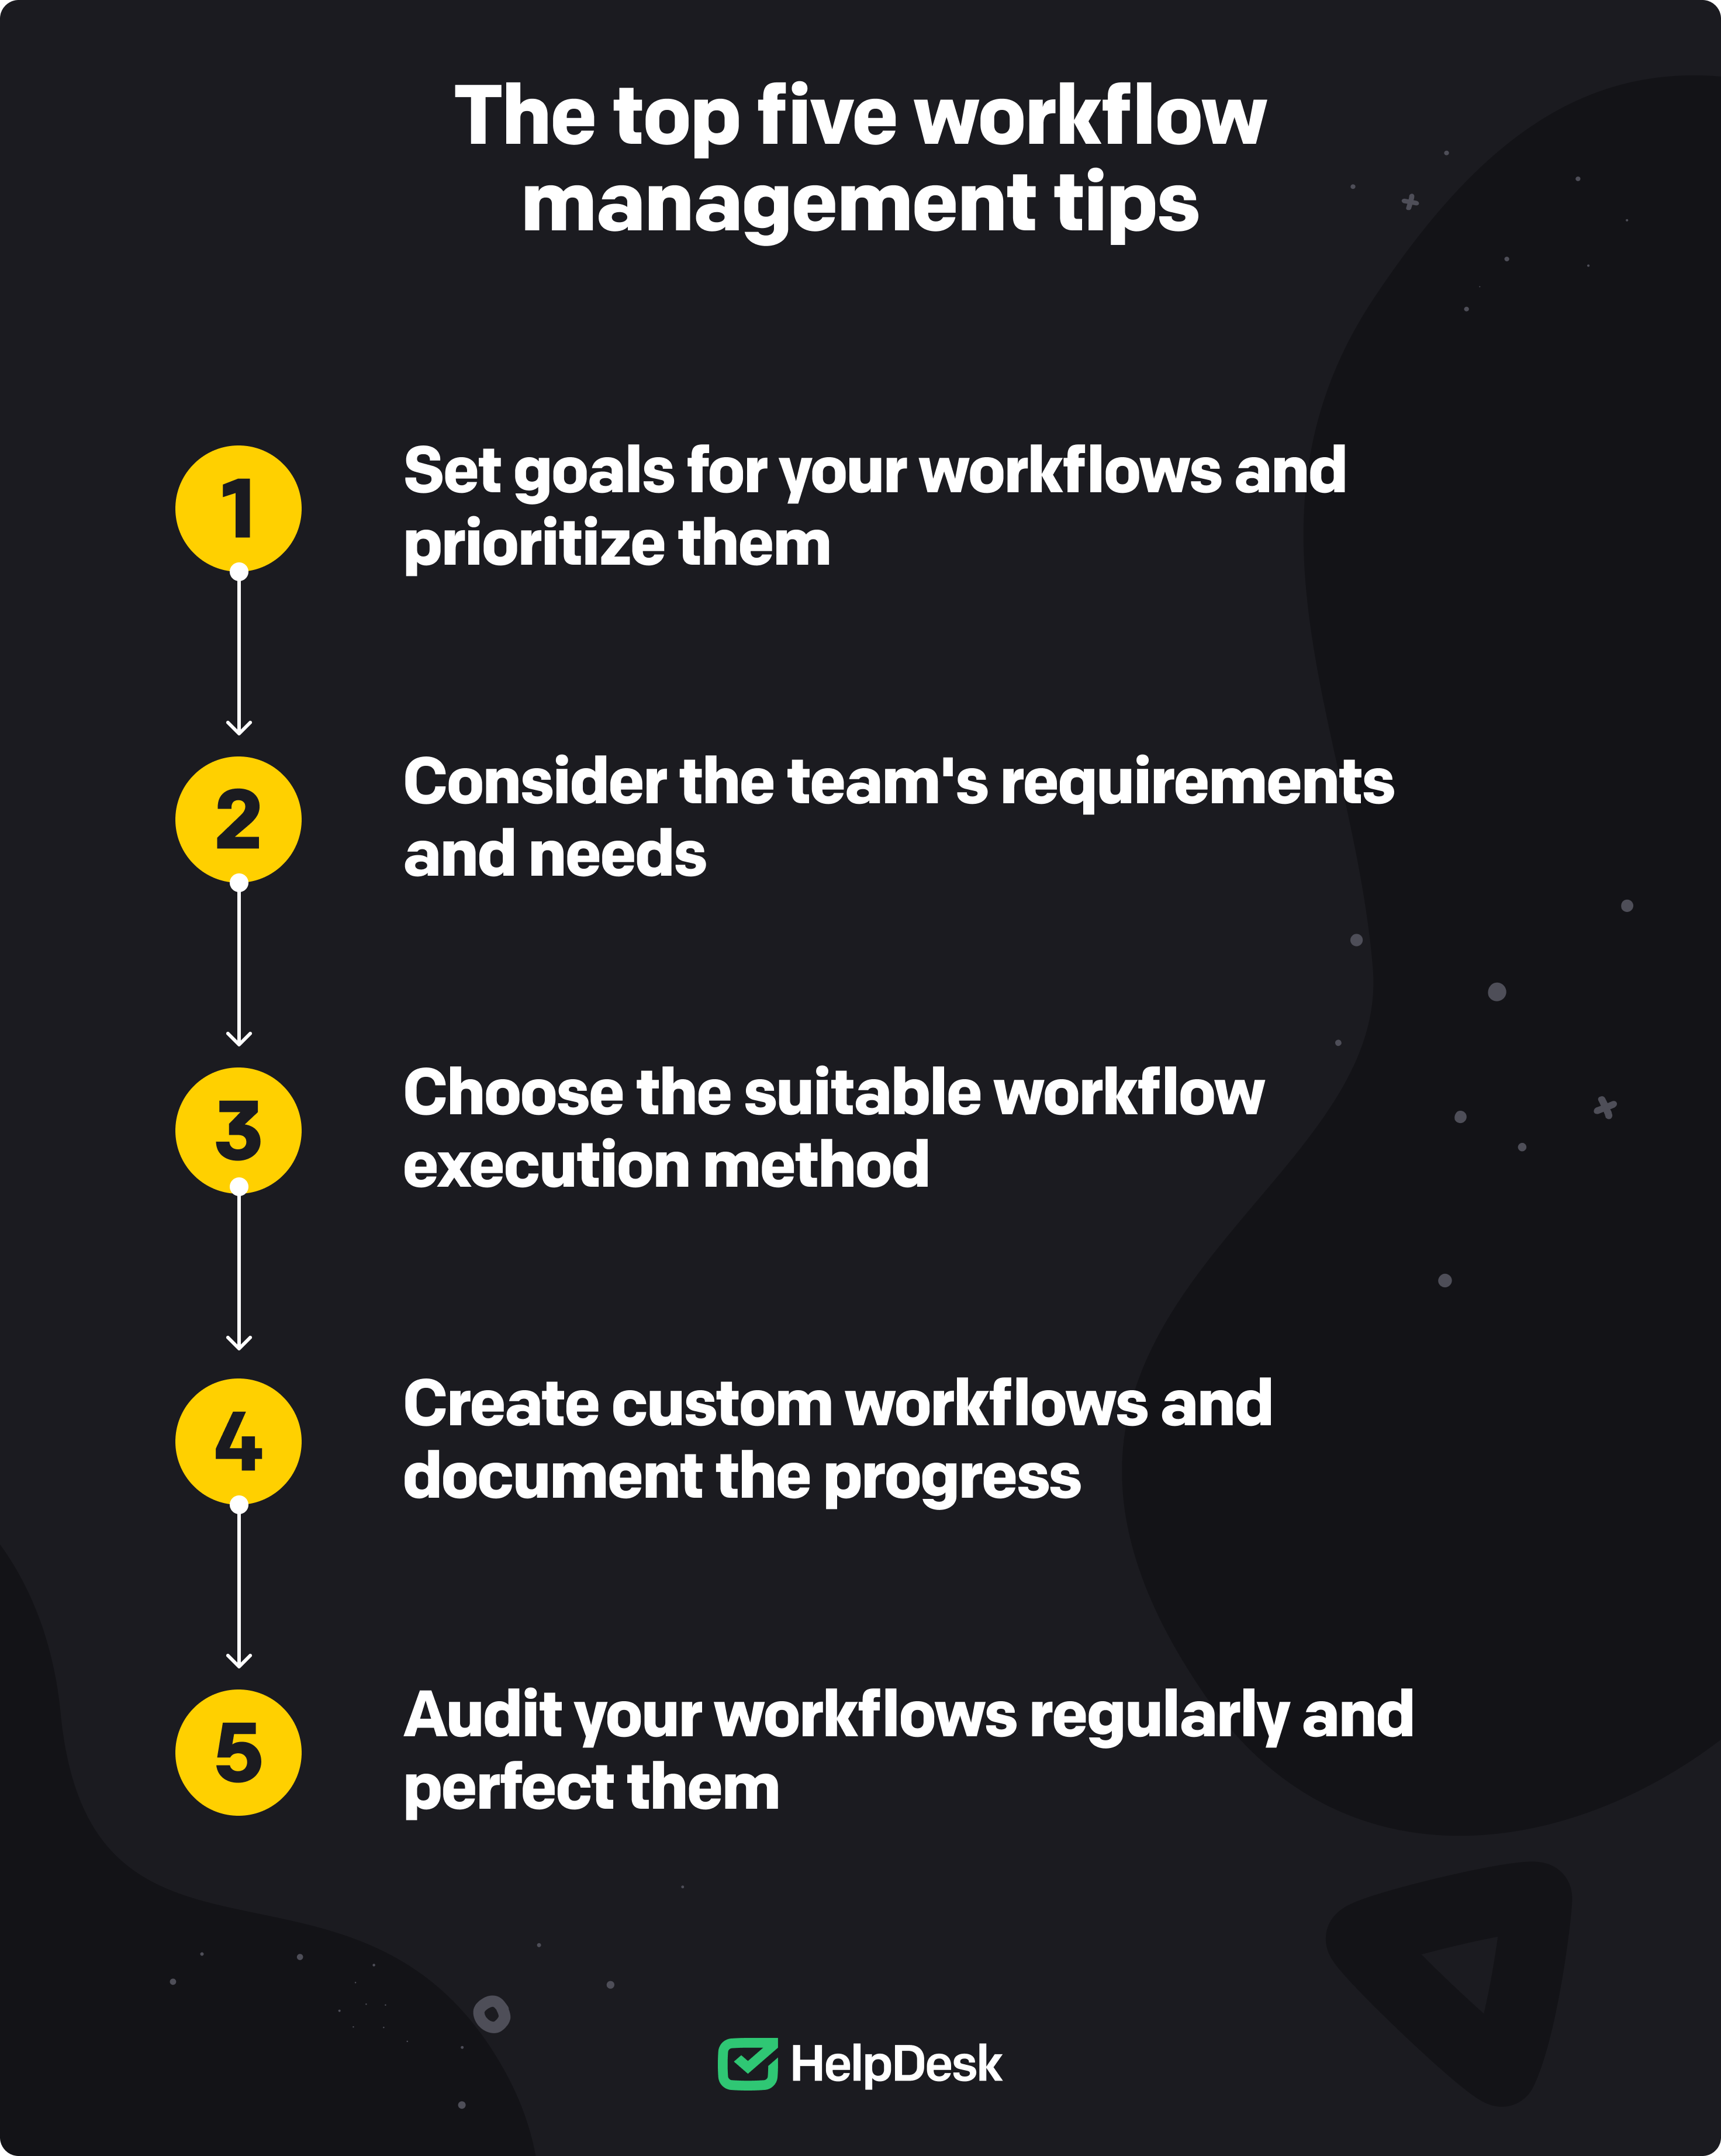 The top five workflow management tips.